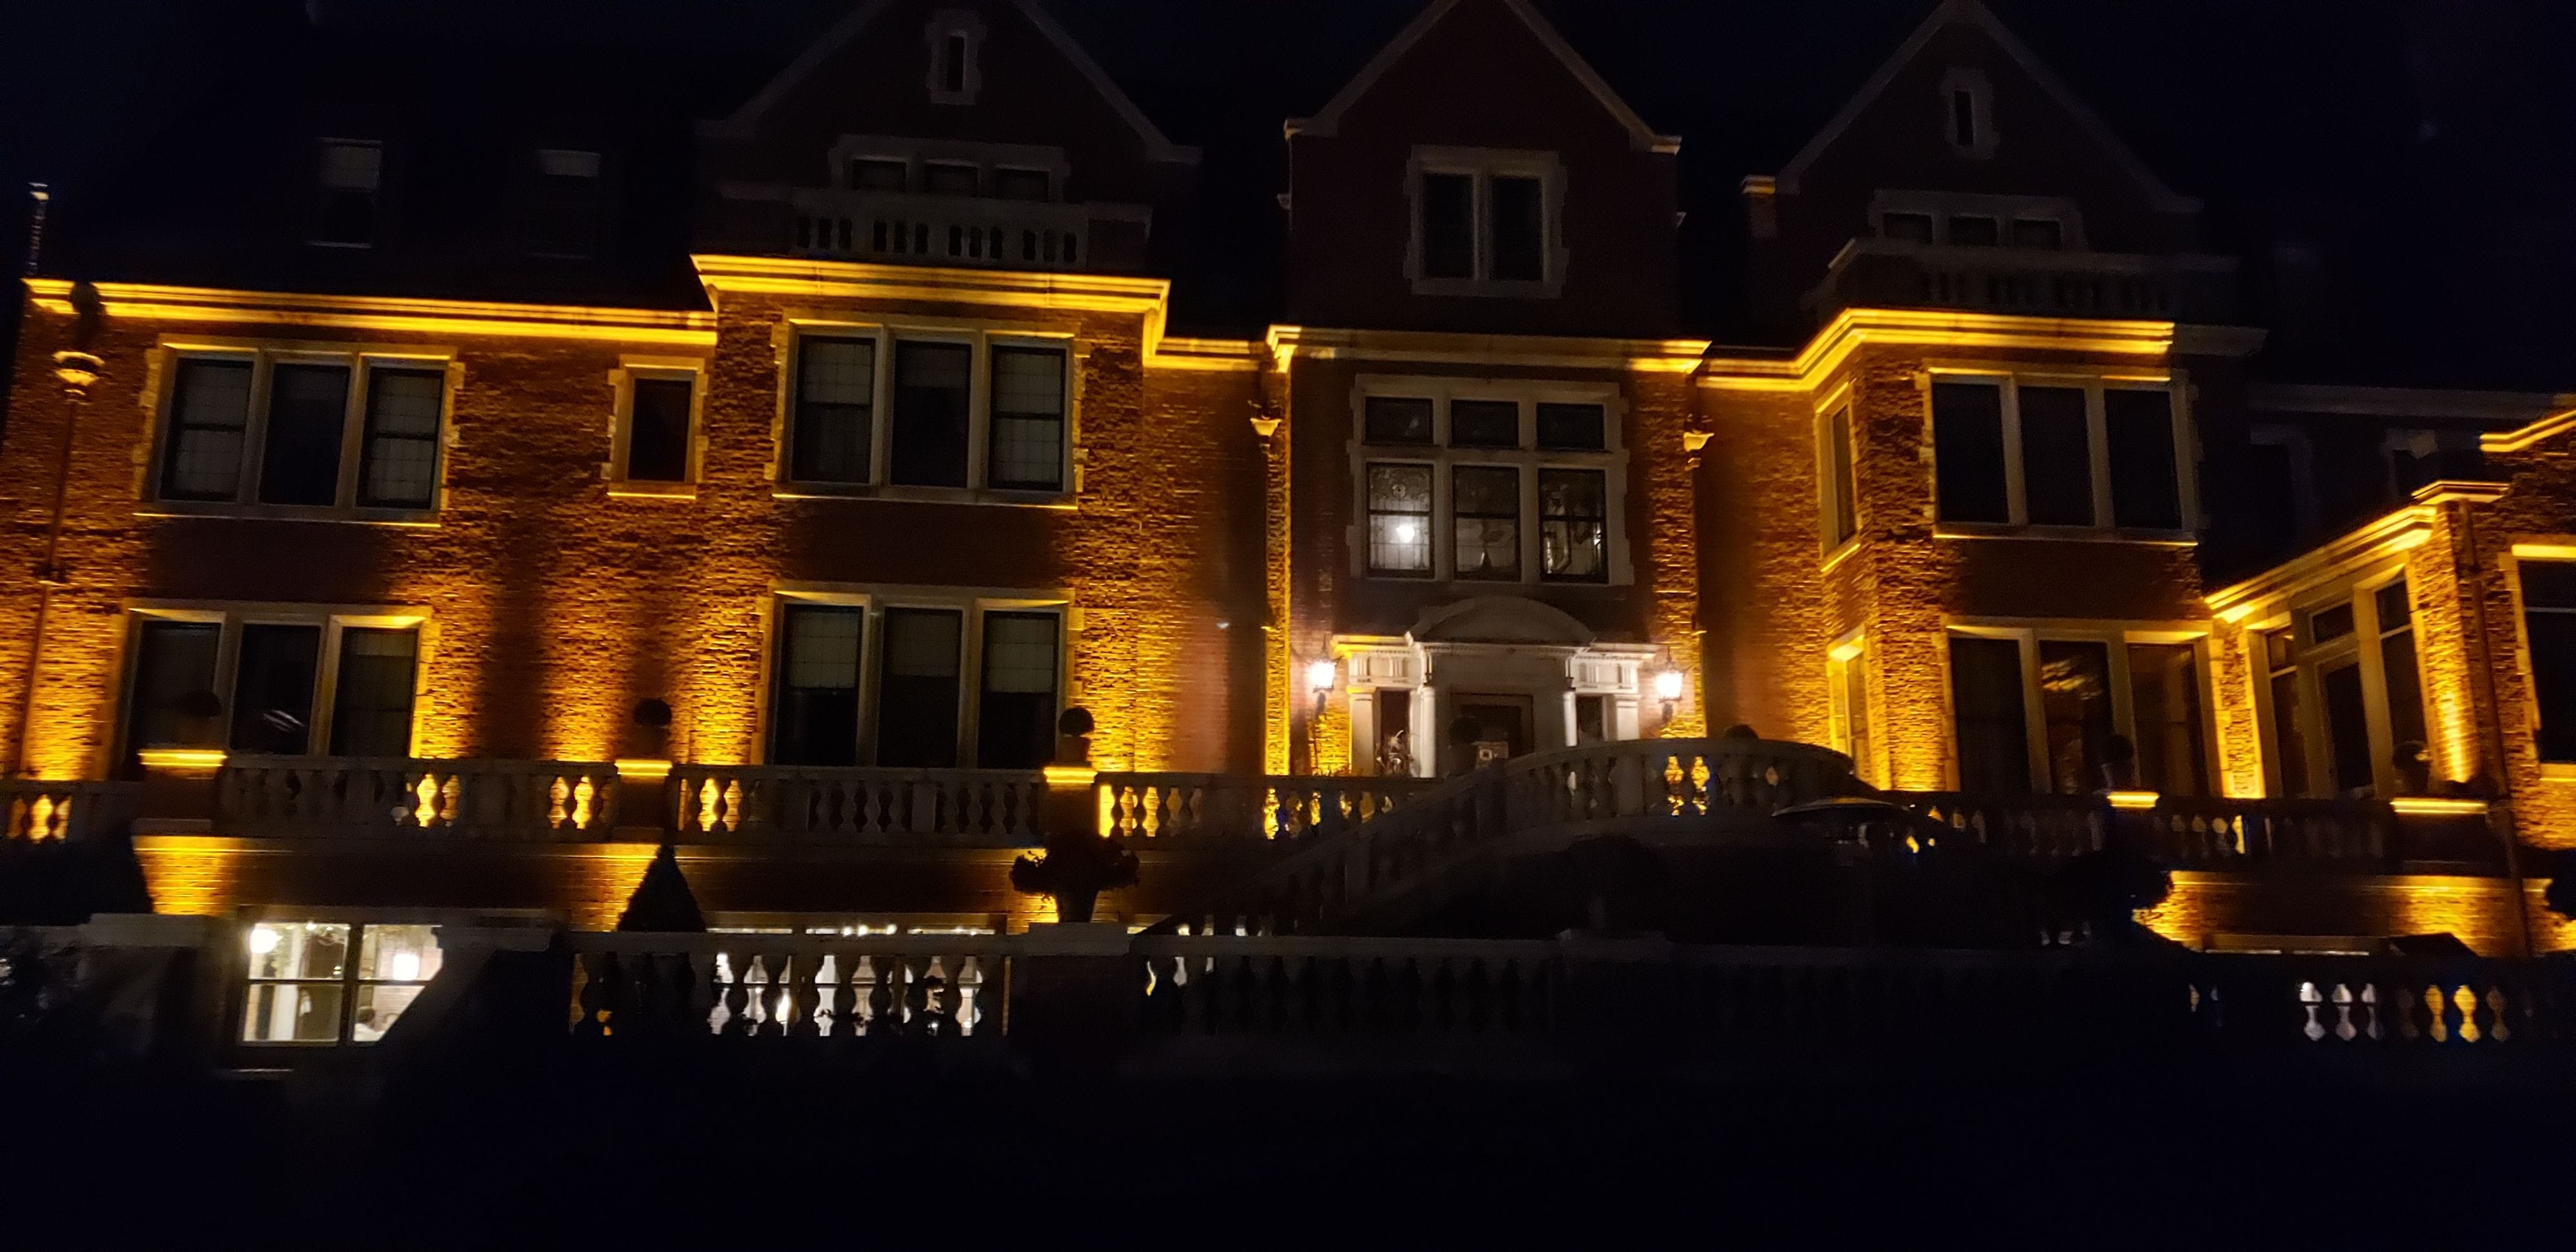 Outdoor up lighting in amber on the back of the Glensheen mansion